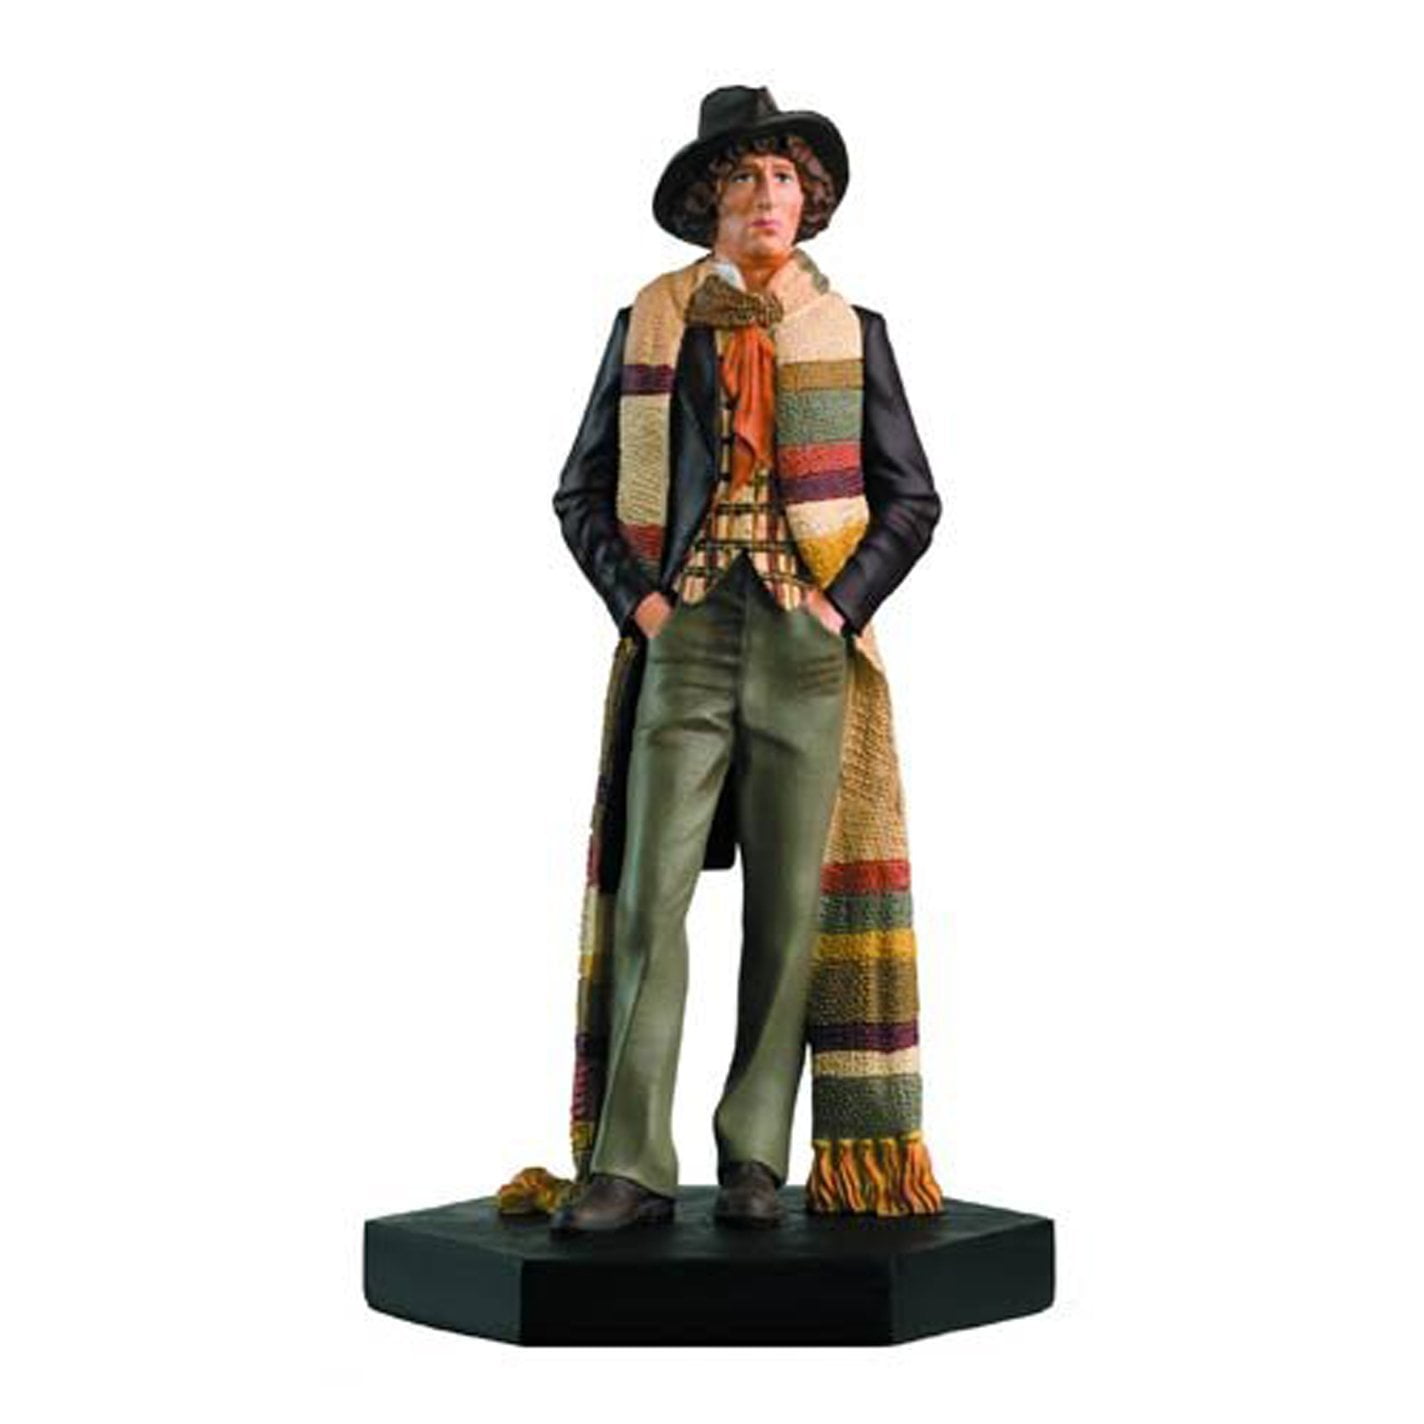 Underground Toys Doctor Who 4th Doctor #17 Collector Figure 